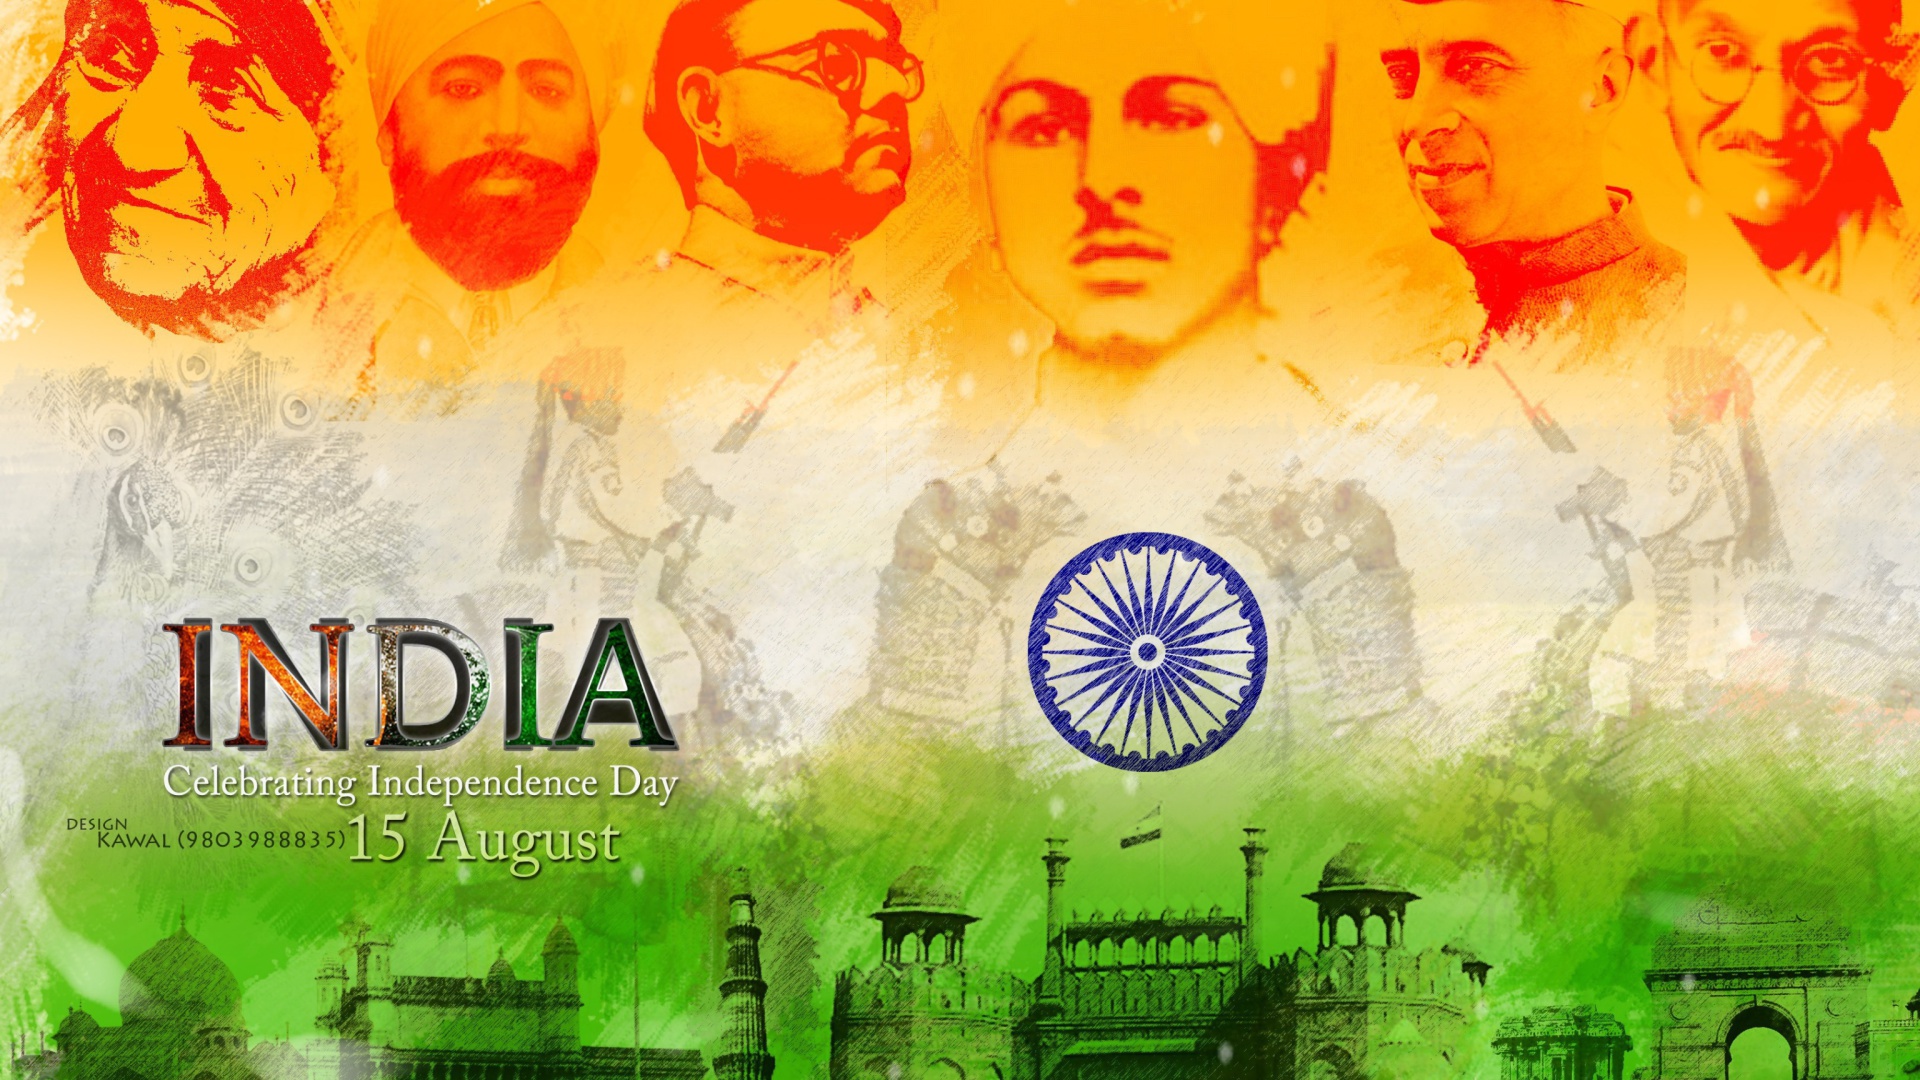 Independence Day India 15 August wallpaper 1920x1080